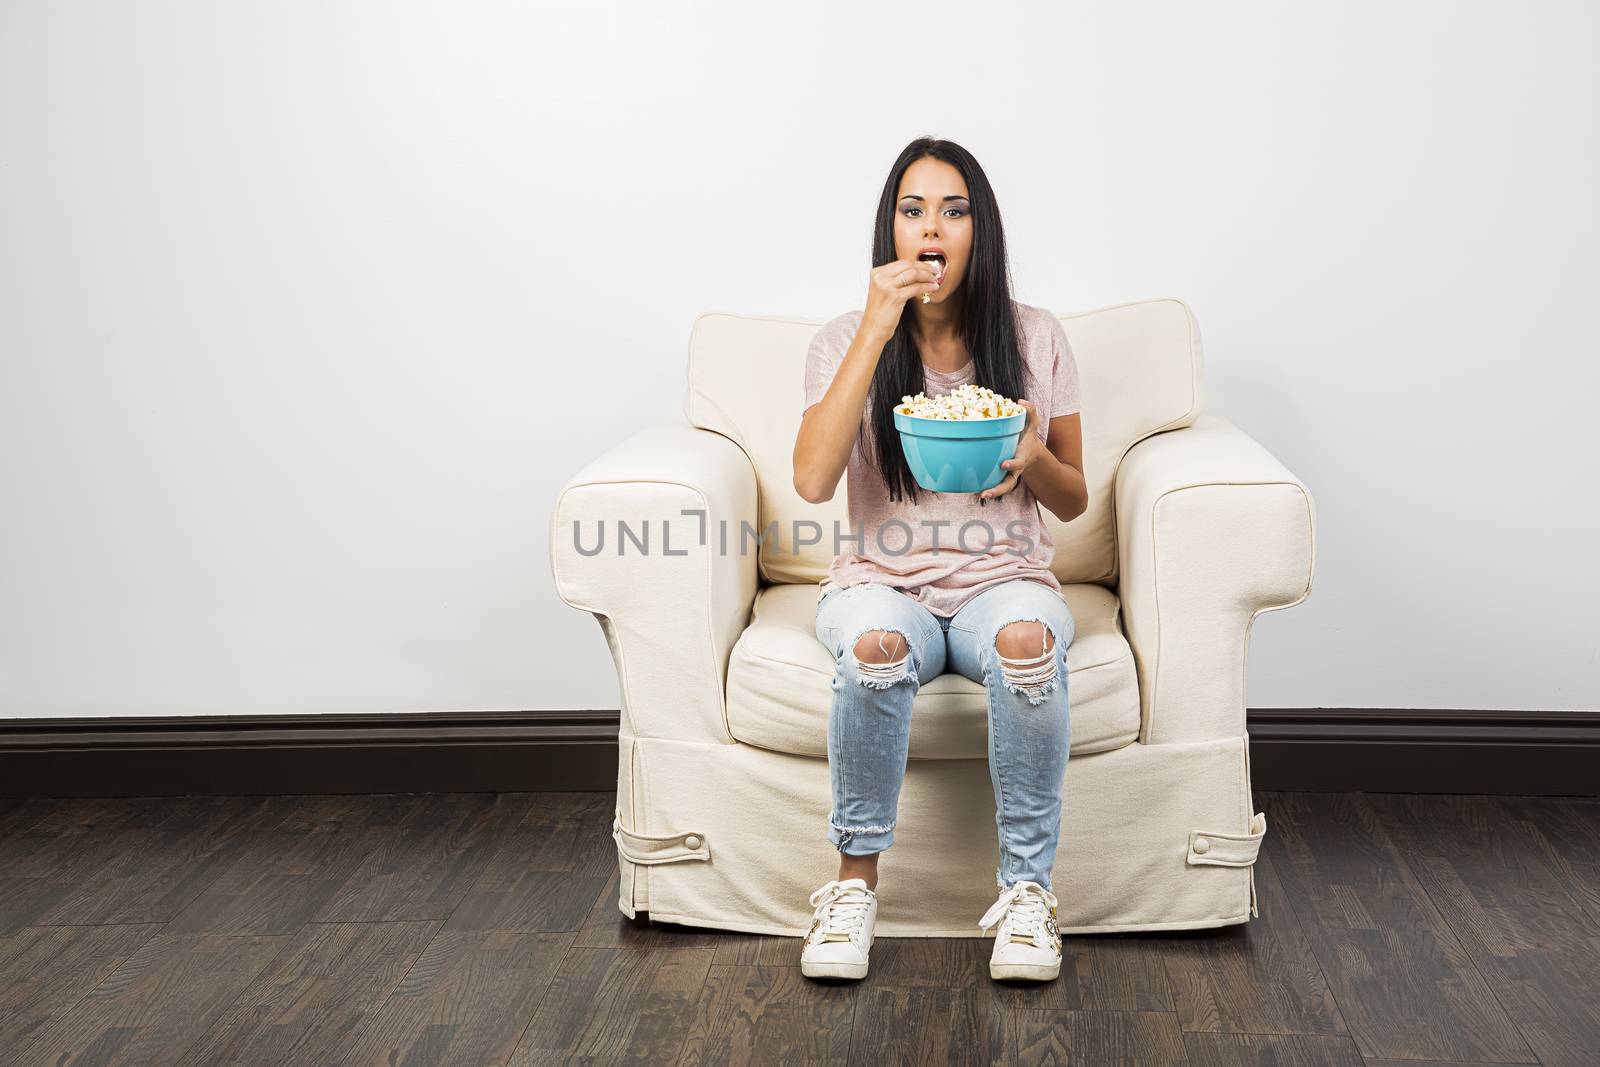 Young woman sitting on a white couch, eating popcorn from a blue bowl